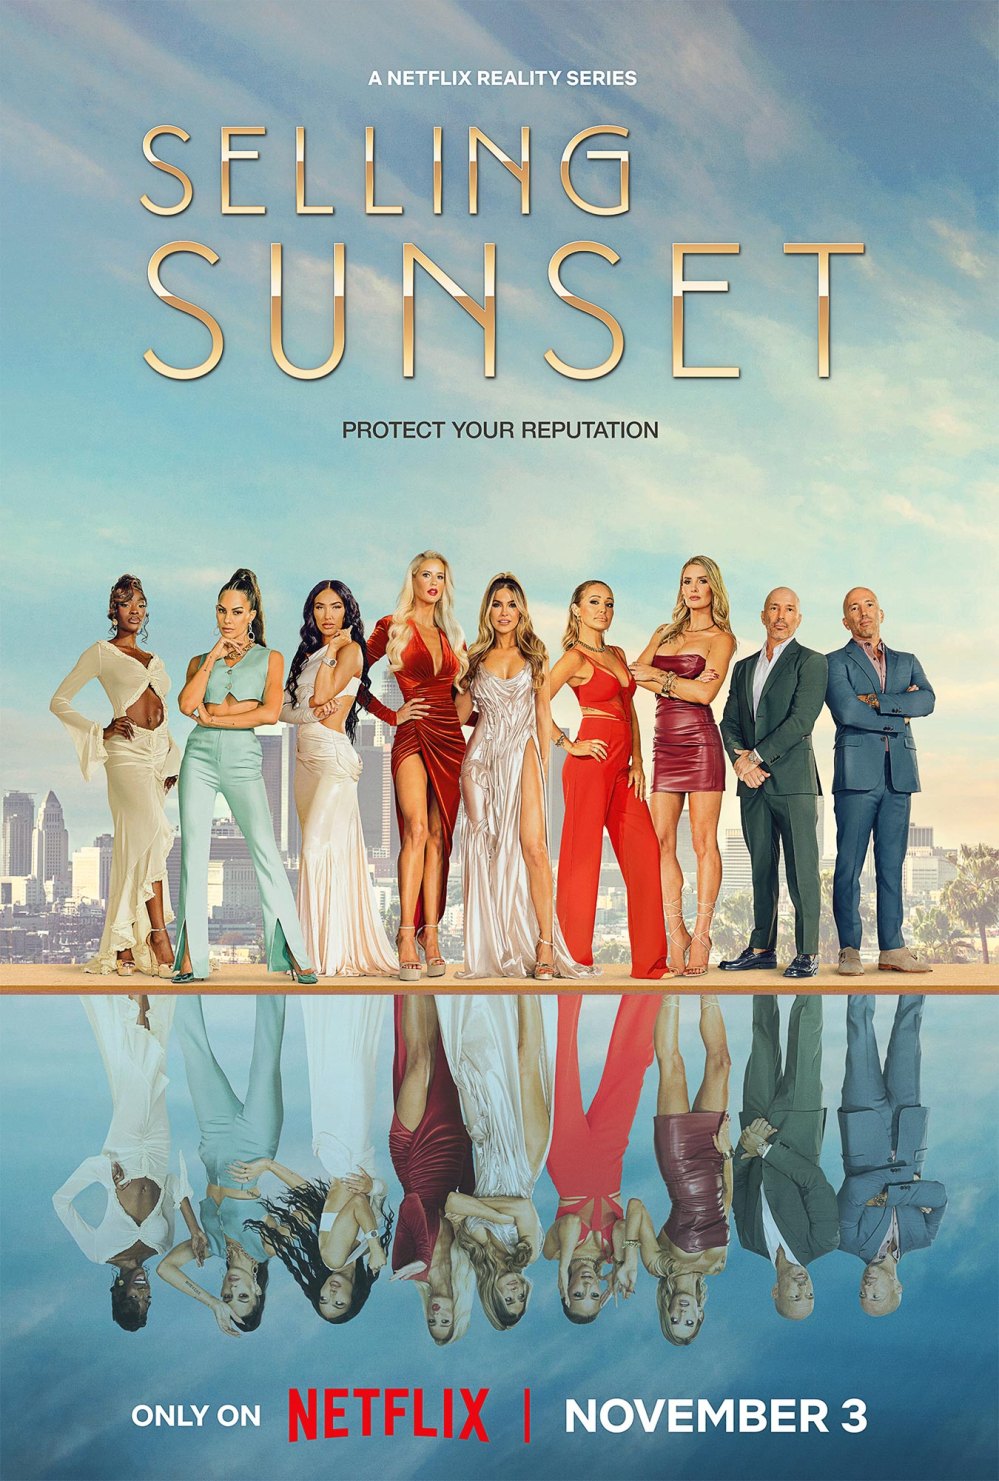 Heather Rae El Moussa Jokes She Was Pushed in the Water of Selling Sunset Season 7 Promo Pic 256 267